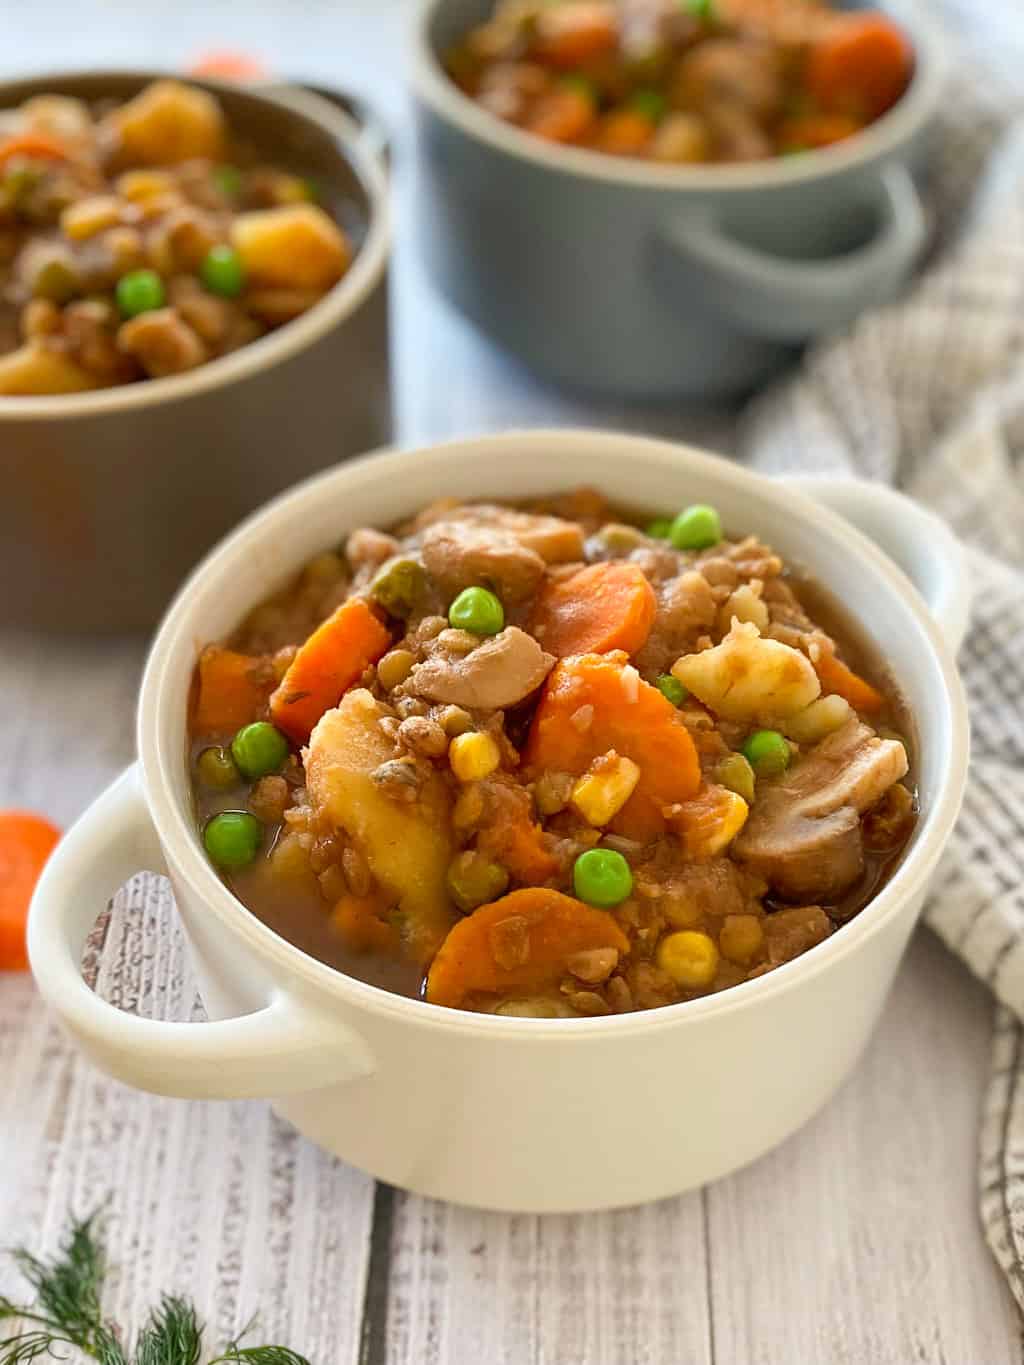 Three bowls filled with vegan stew with carrot, mushrooms, potatoes, peas.